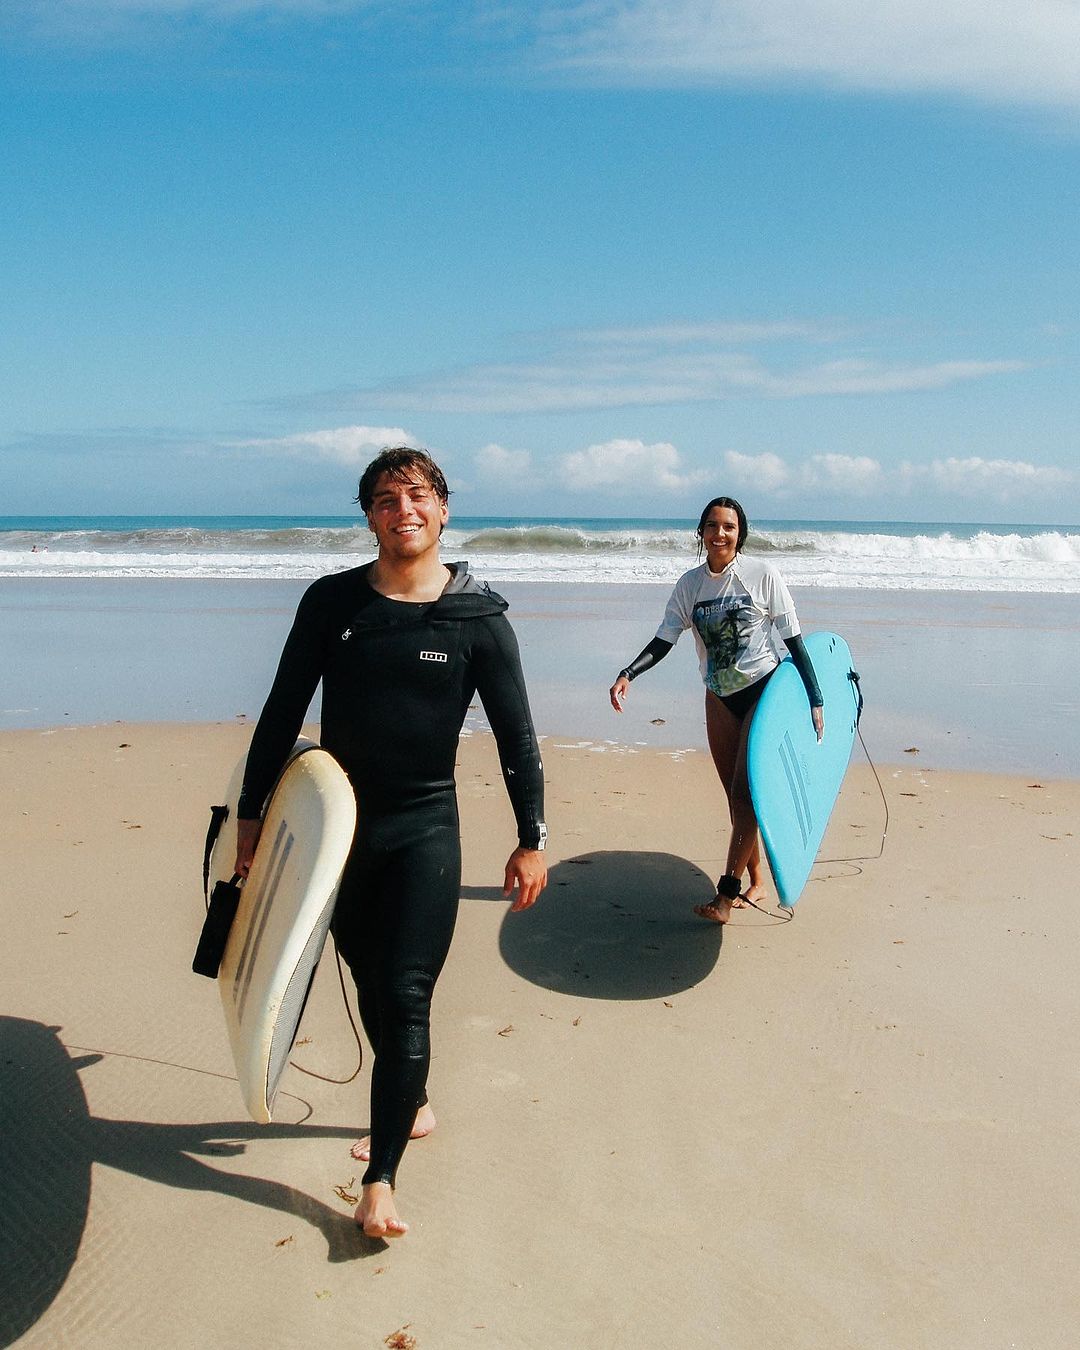 Two smiling surfers leaving the beach in Cantabria after their group surf lessons.